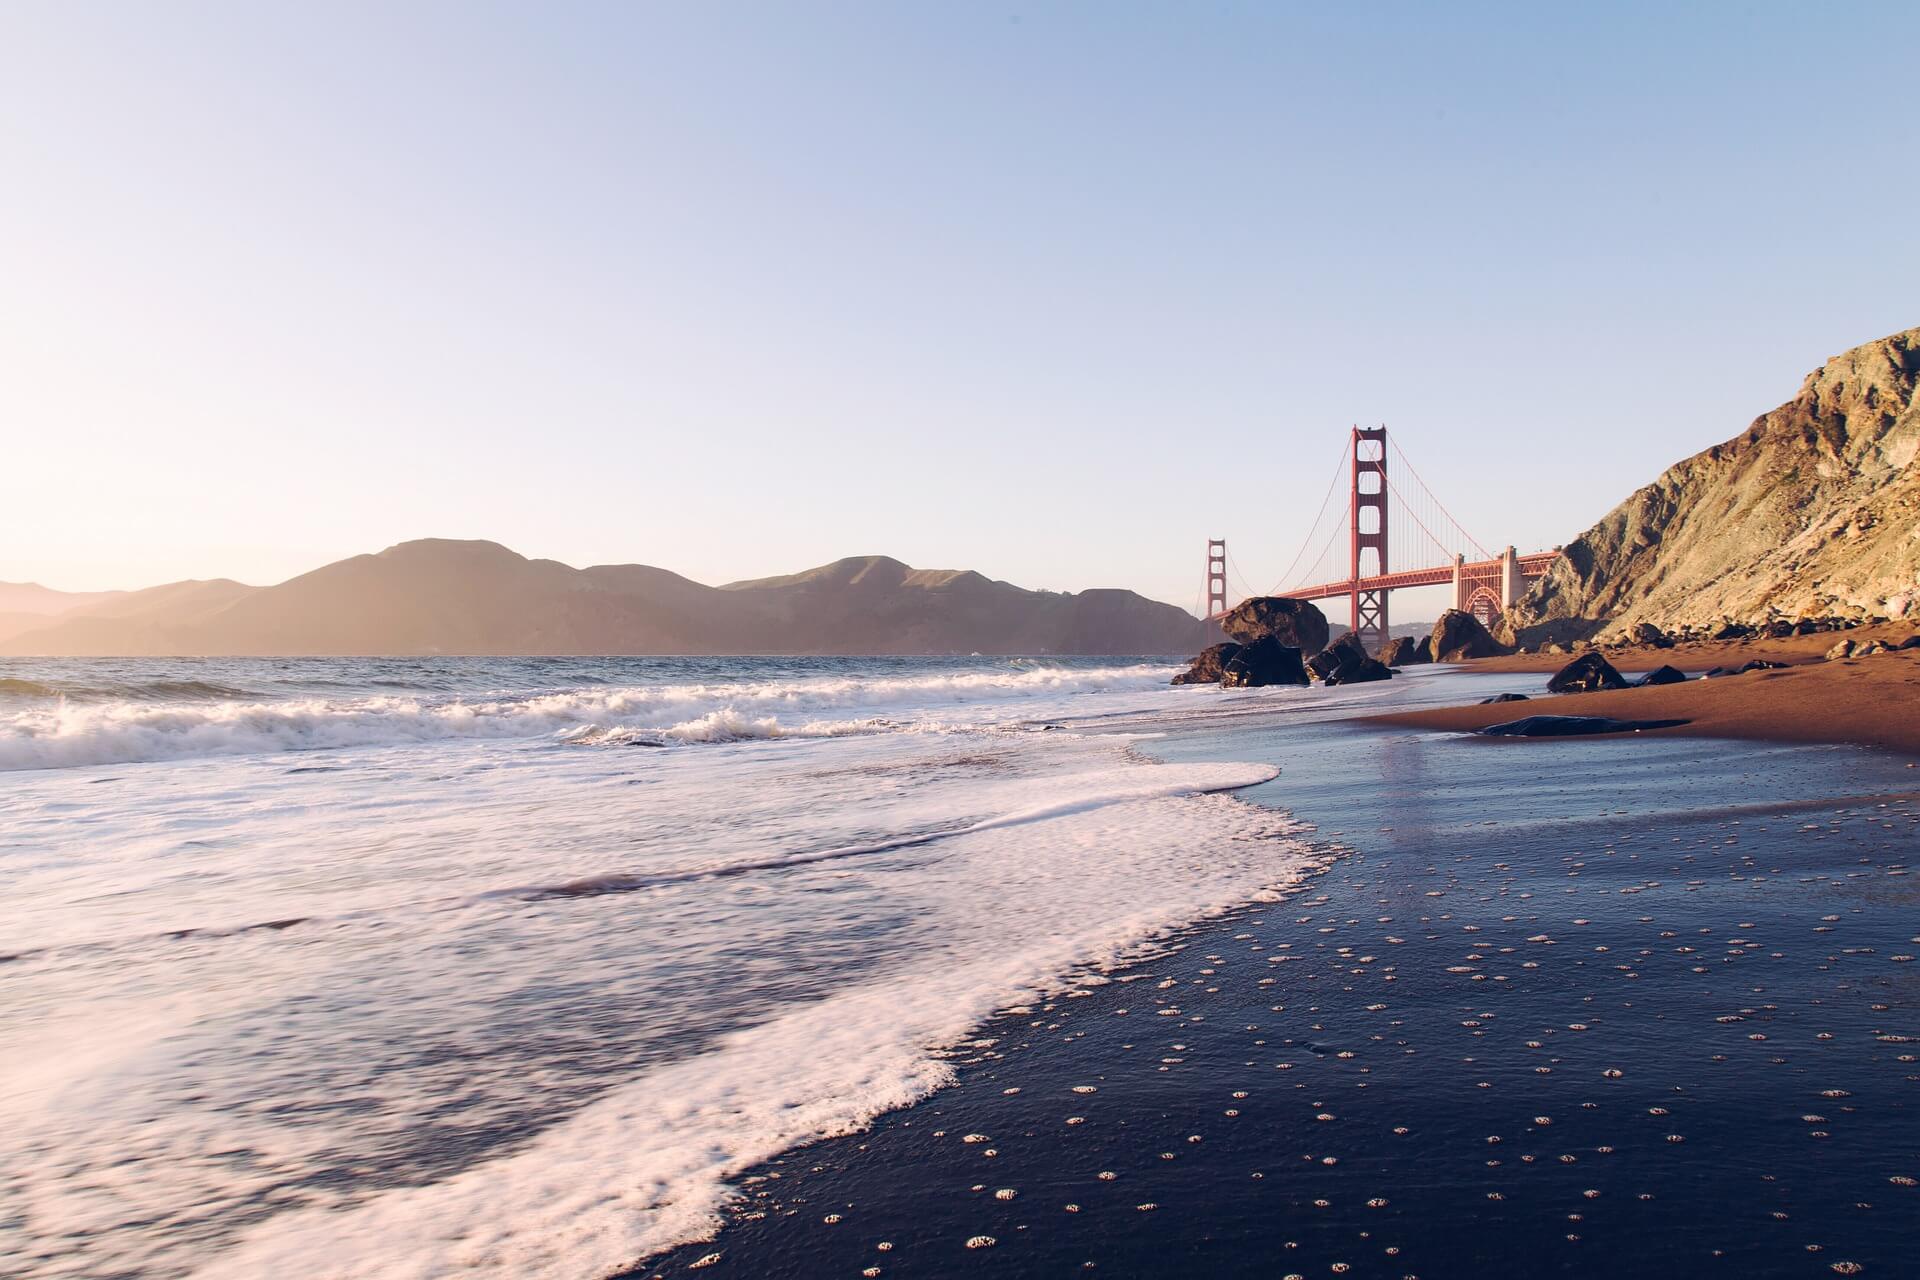 The iconic Golden Gate Bridge and beautiful beaches make the Bay Area one of the world’s most popular regions to visit and call home.